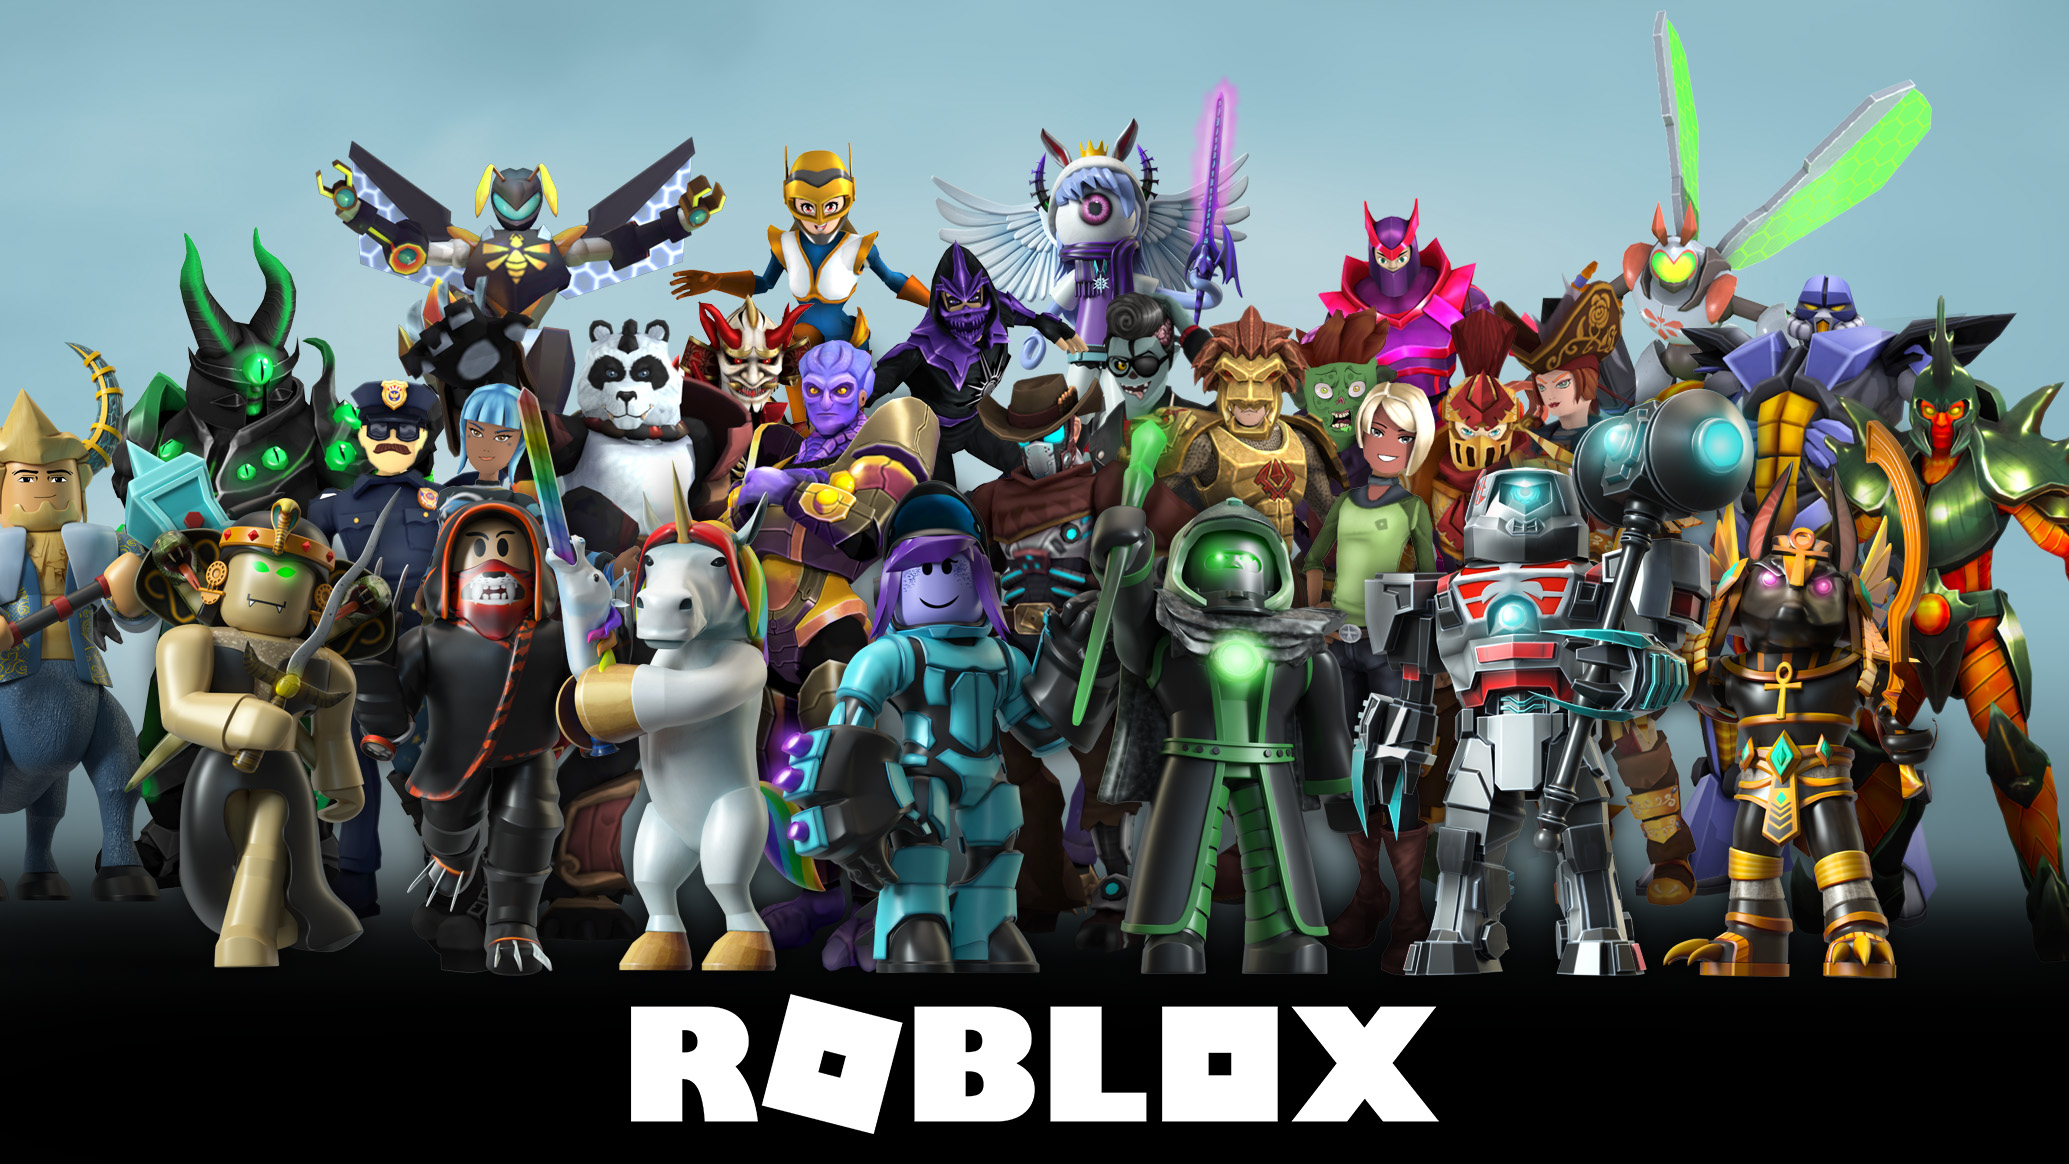 Where To Buy Roblox Gift Cards And How To Redeem Them